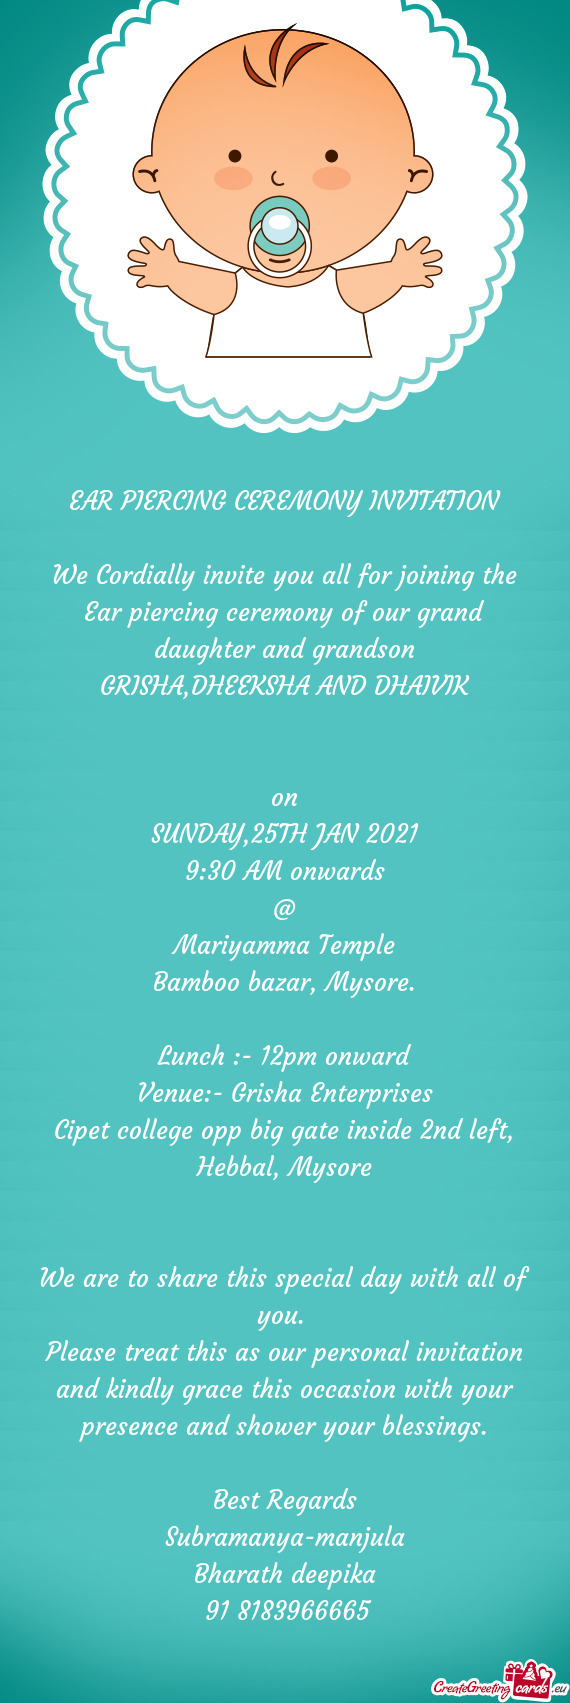 We Cordially invite you all for joining the Ear piercing ceremony of our grand daughter and grandson